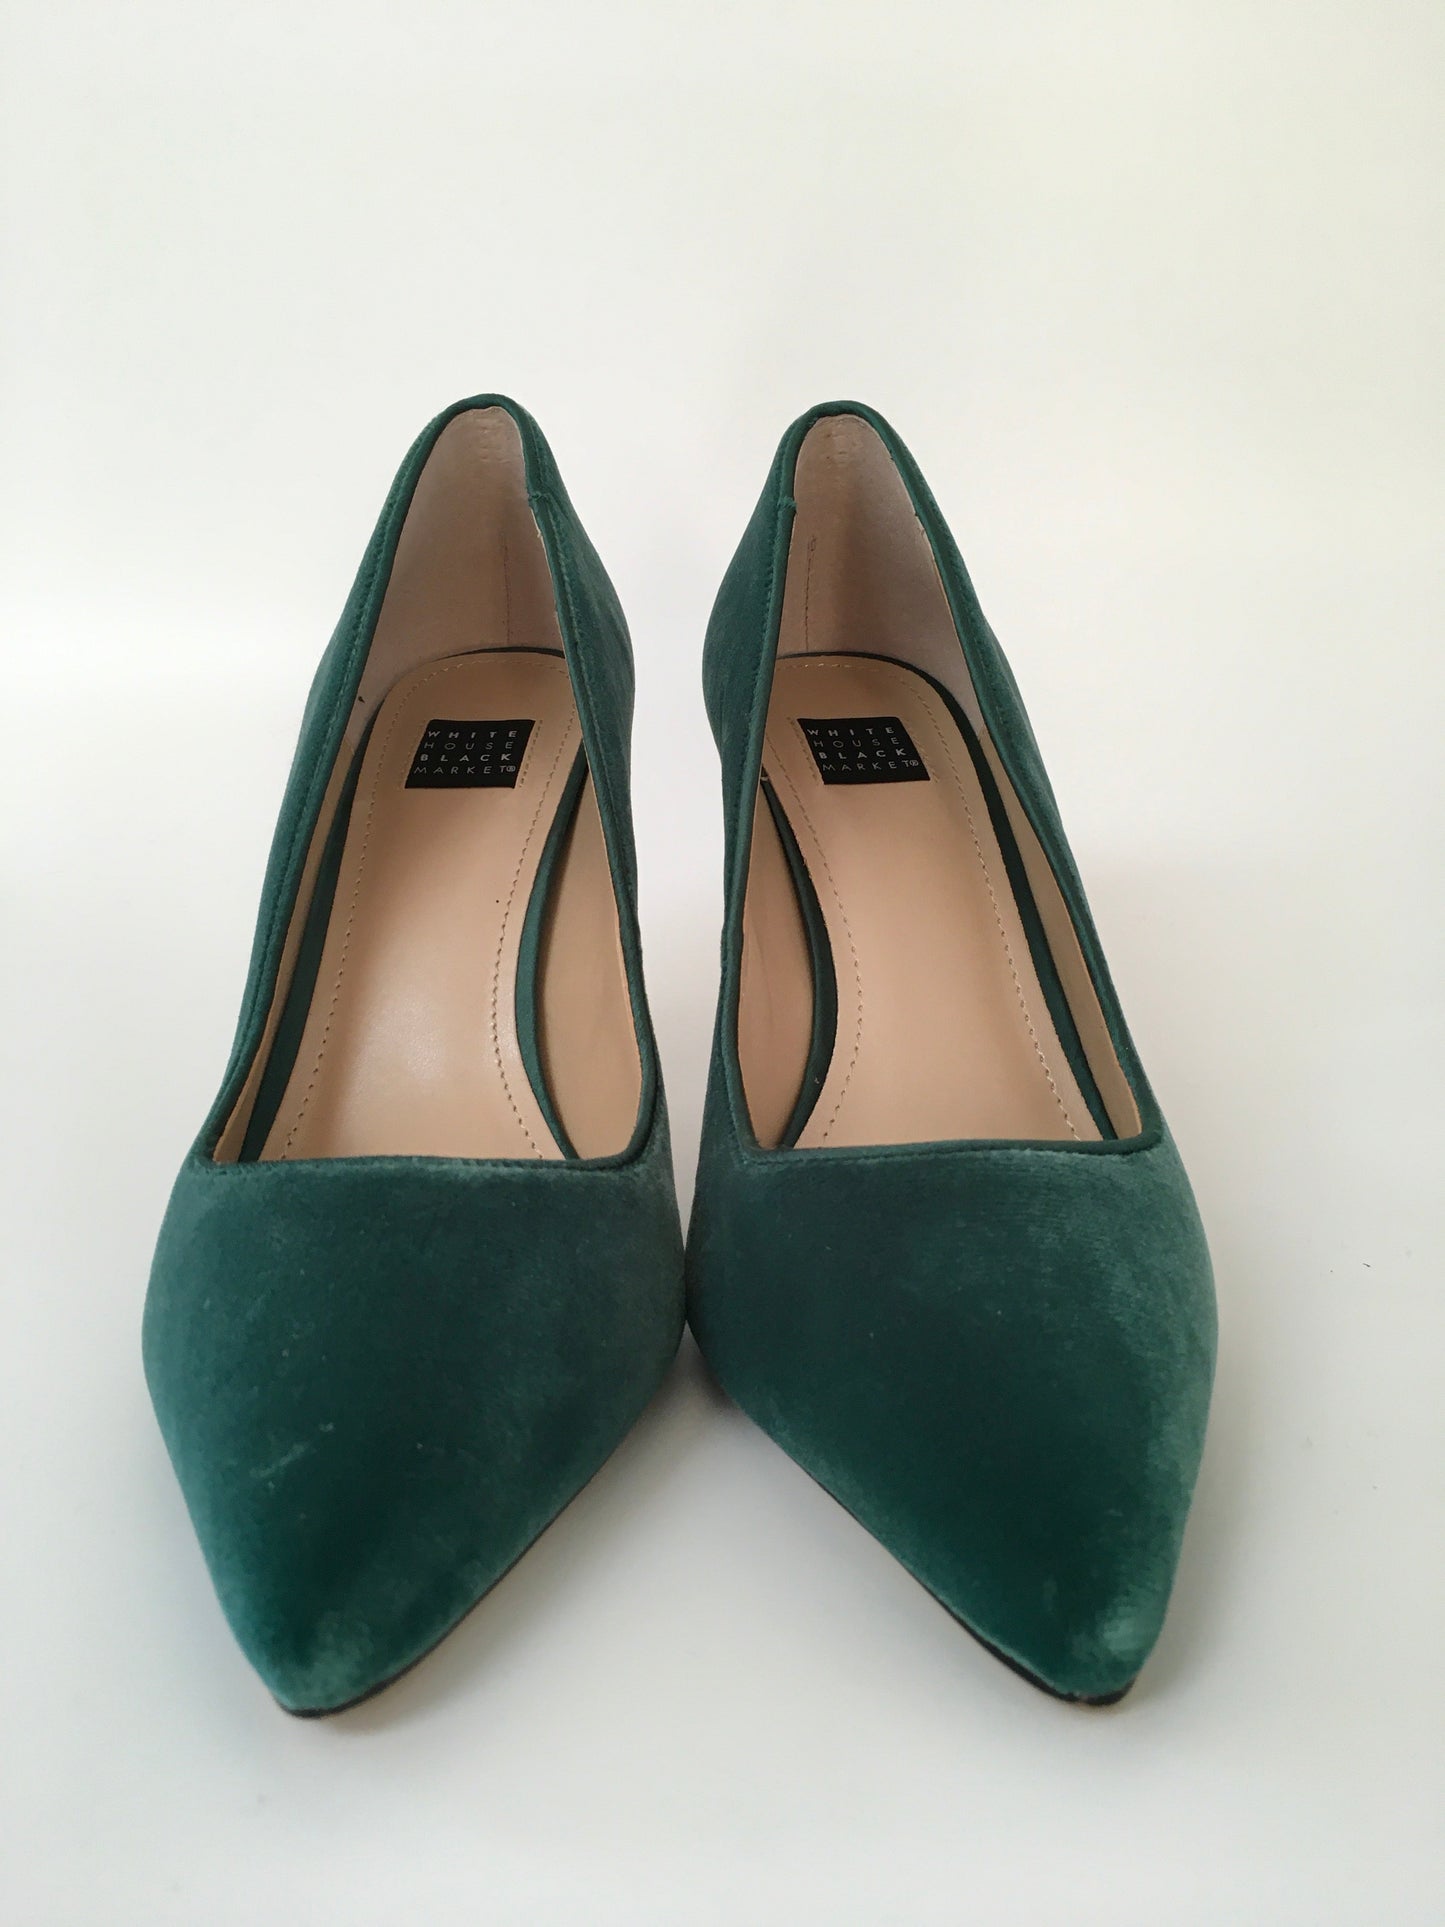 Shoes Heels Stiletto By White House Black Market  Size: 6.5